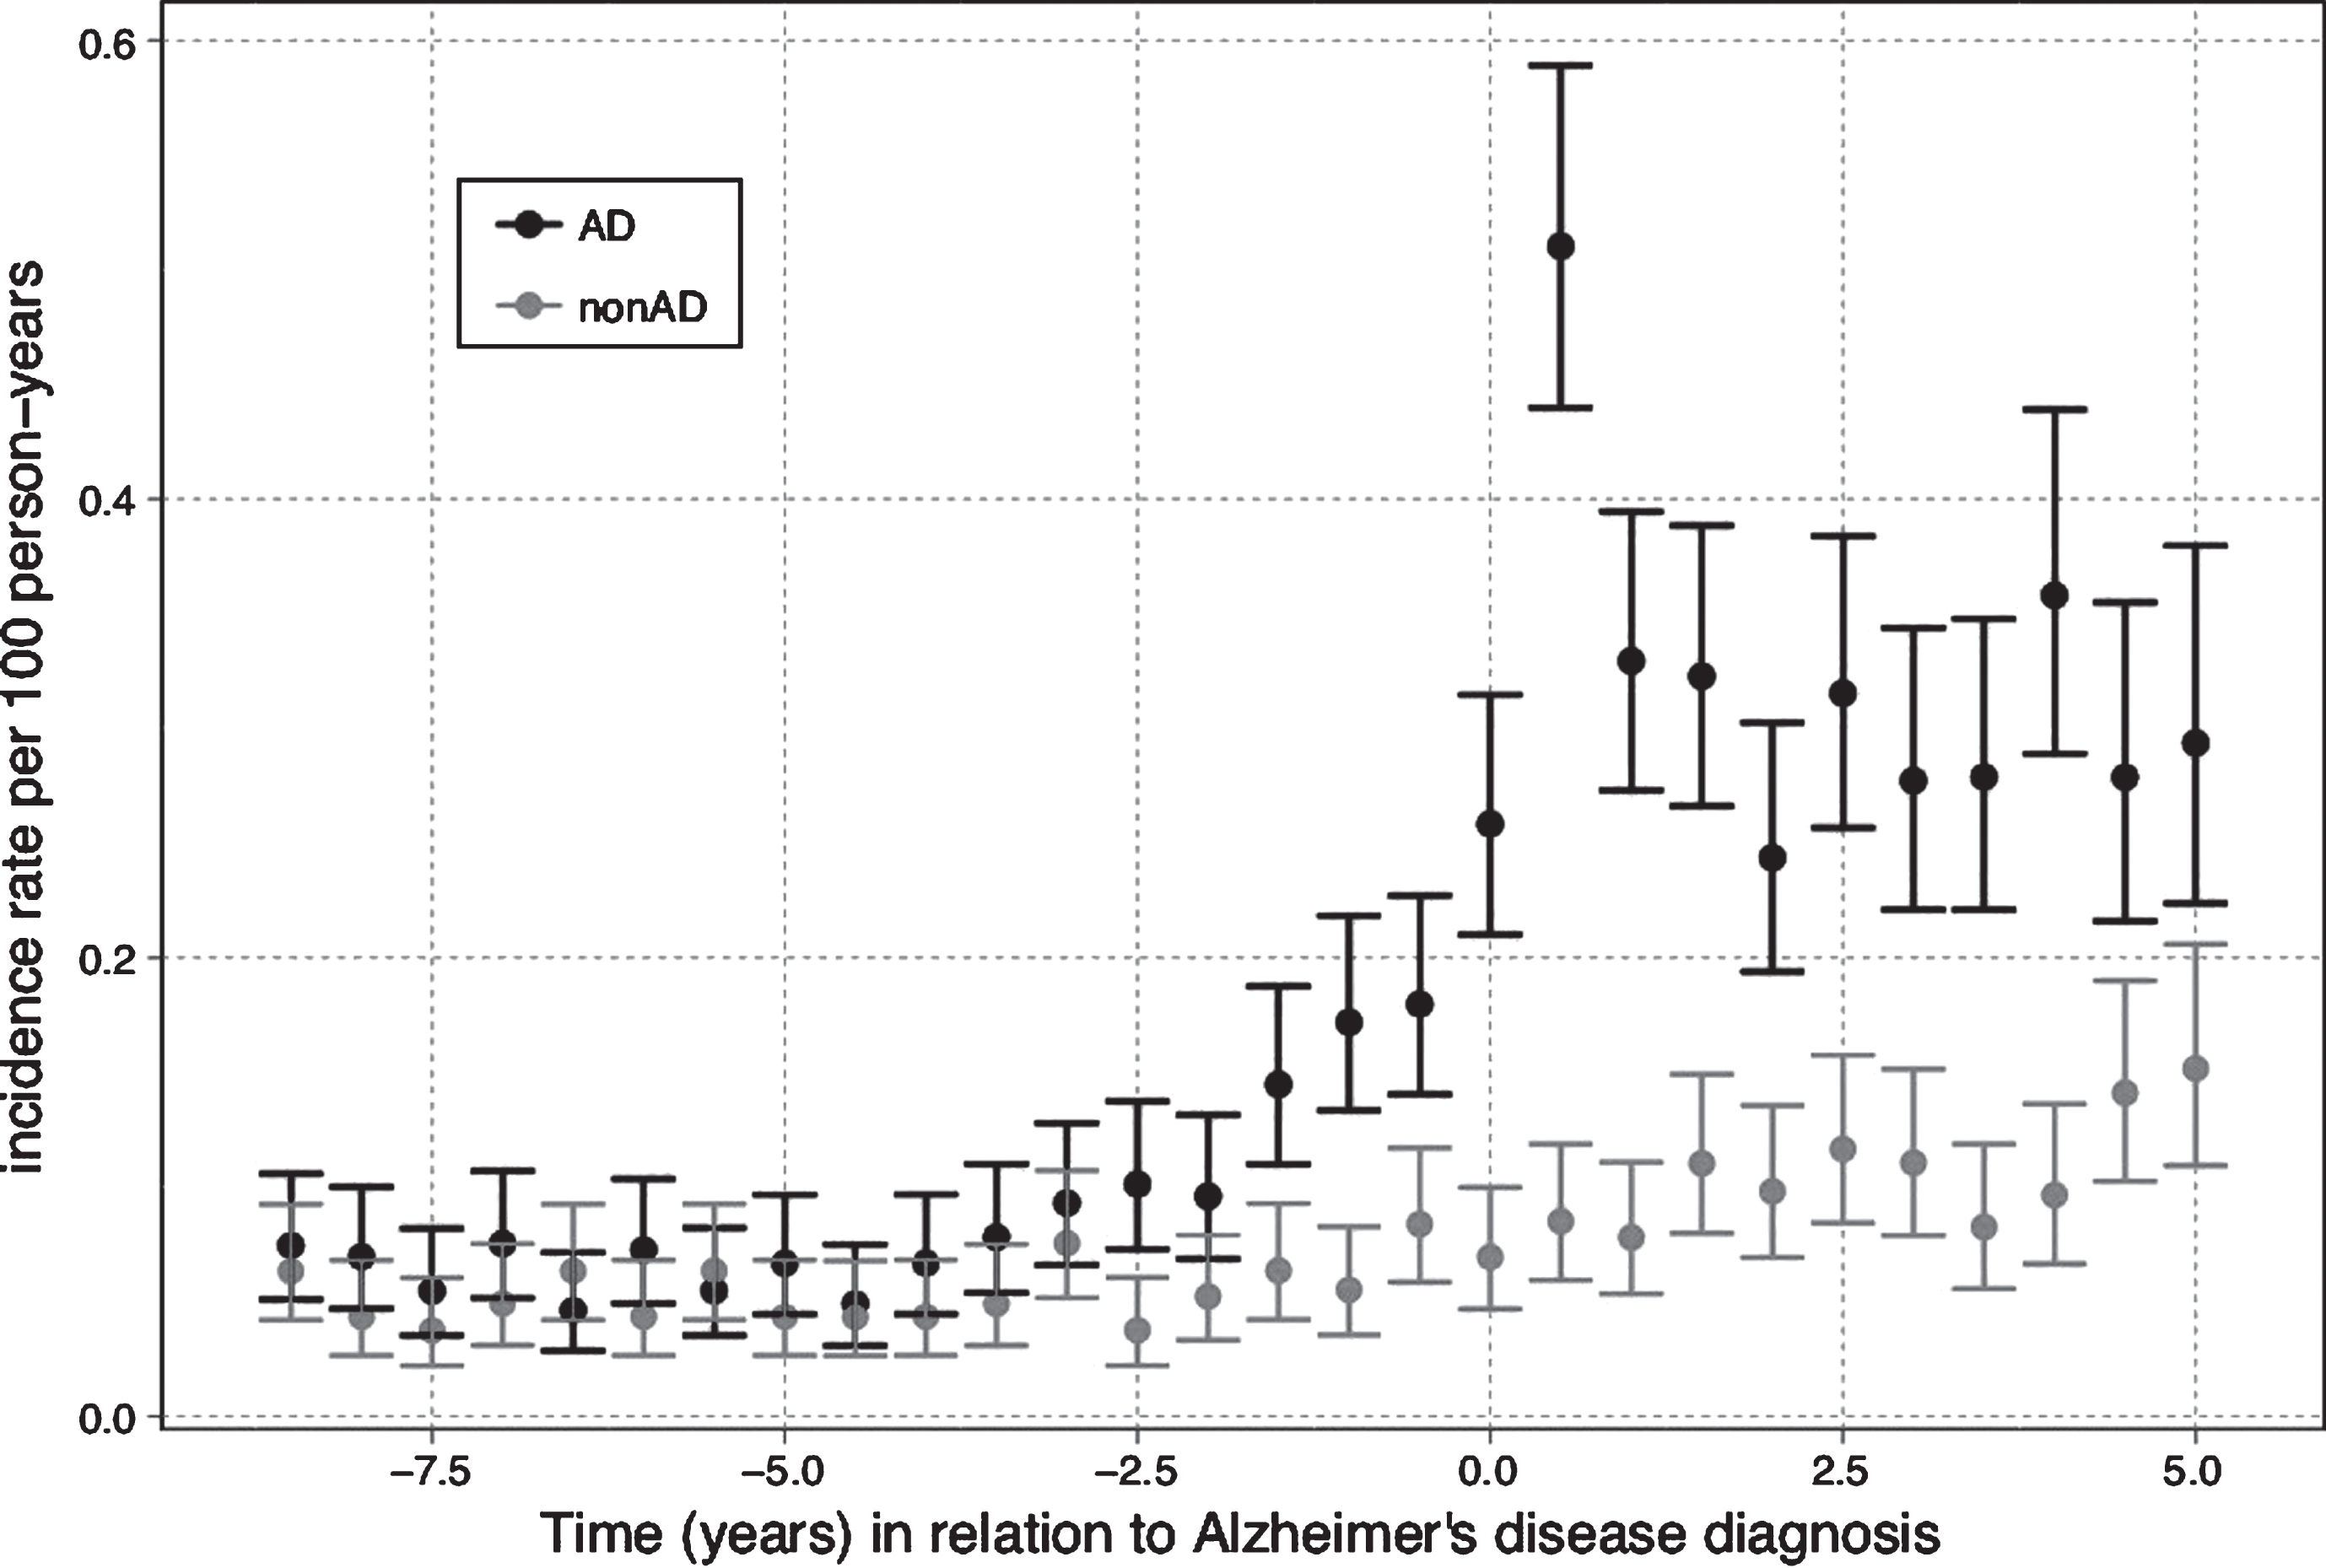 The Incidence of epilepsy diagnosis in relation to Alzheimer’s disease (AD) diagnosis.